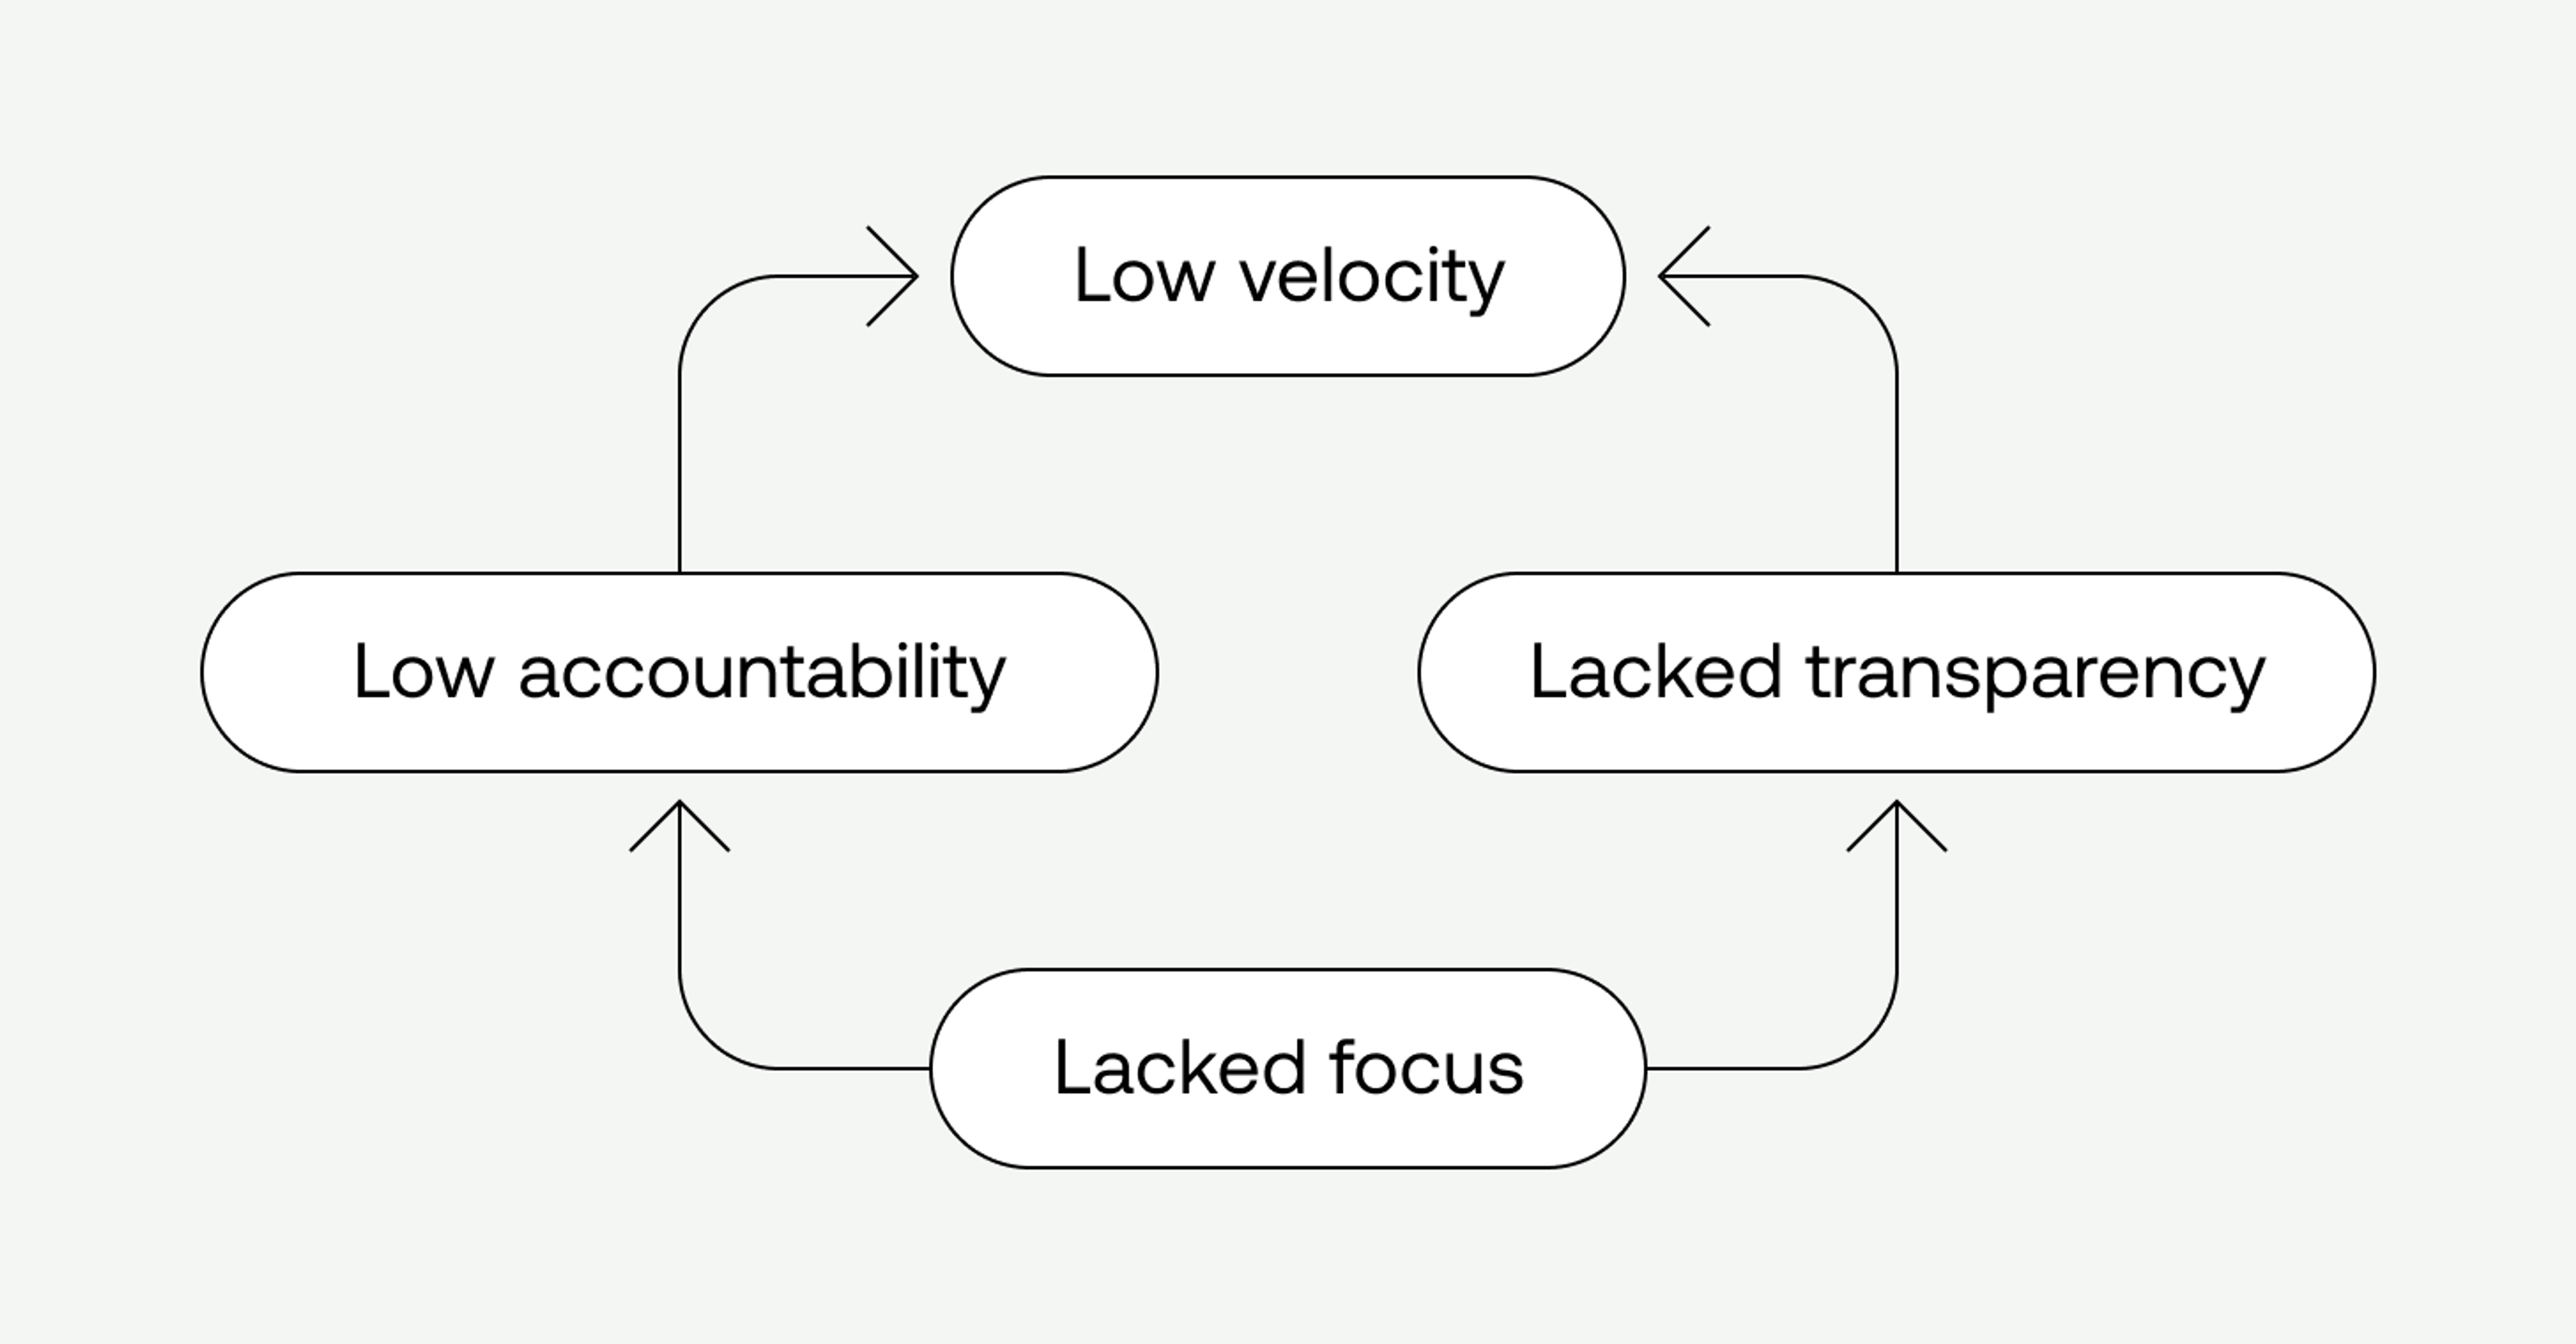 A chart with "lacked focus" at the bottom with arrows point to both "low accountability" and "lacked transparency". Both of those have arrows pointing to "low velocity".